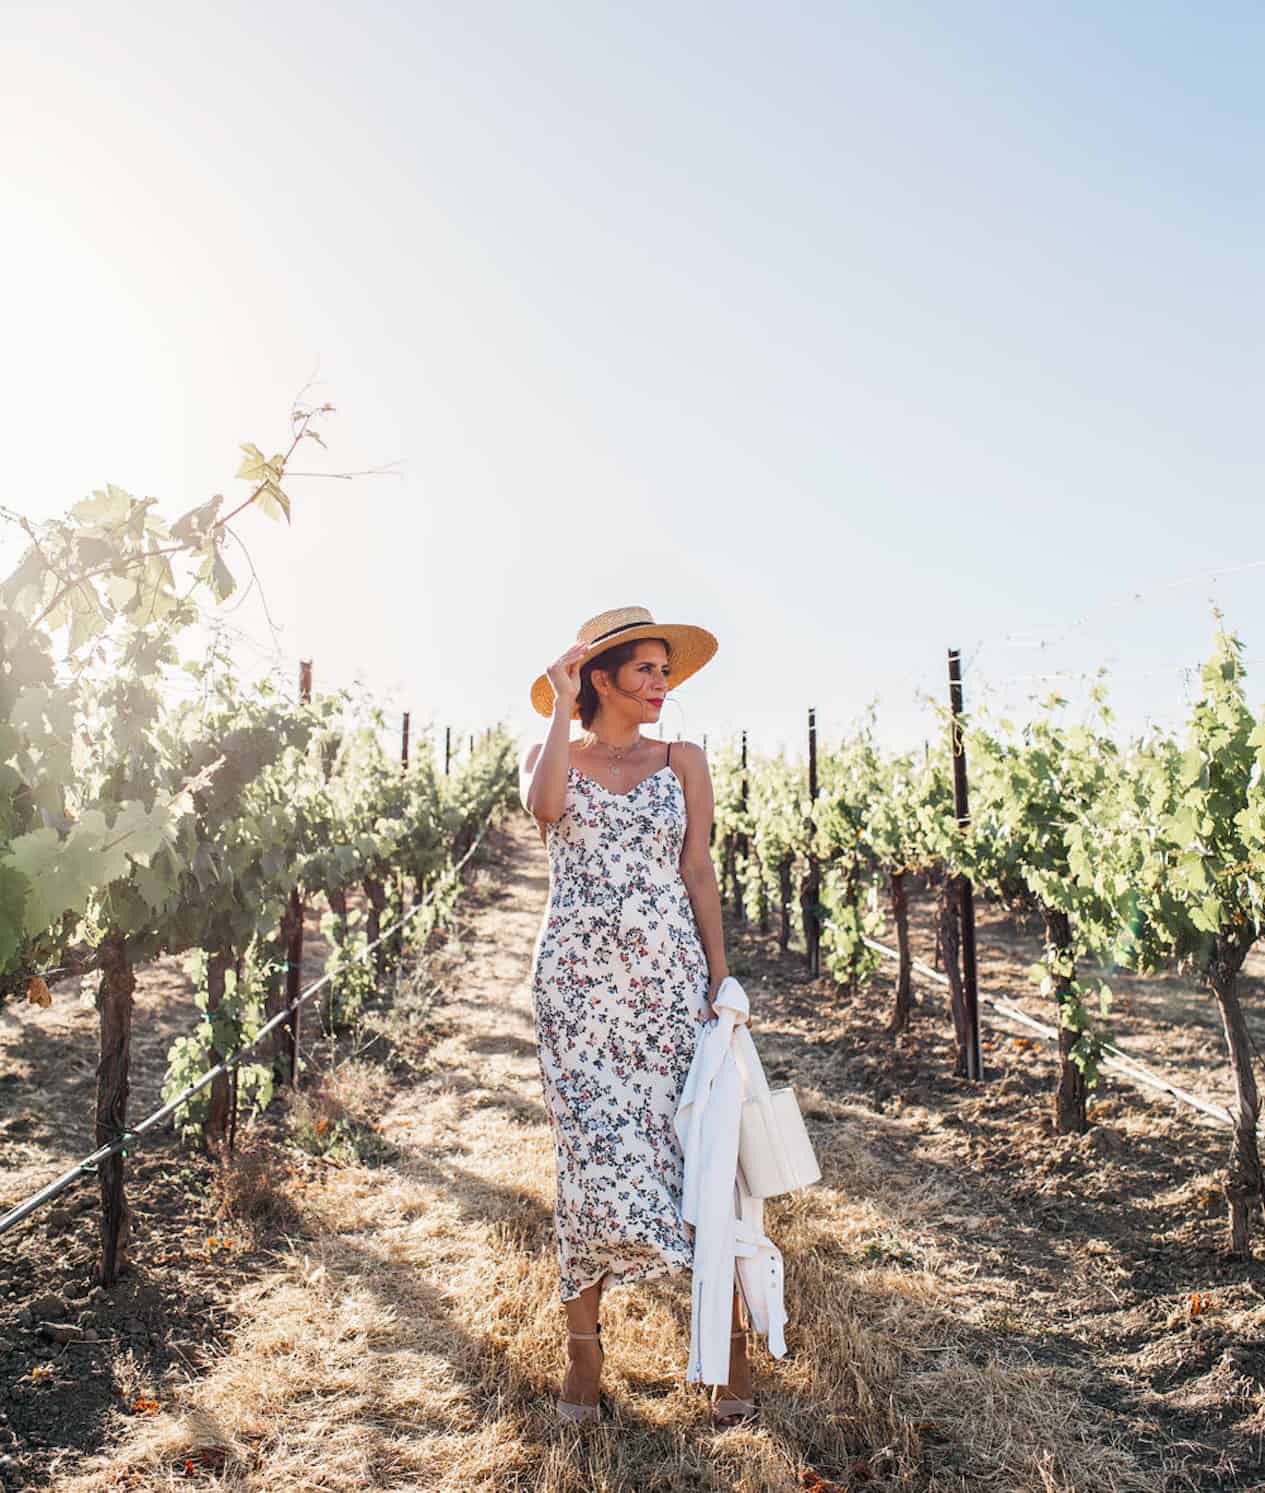 image of a woman standing in a winery in the vineyard wearing a floral midi dress and straw hat